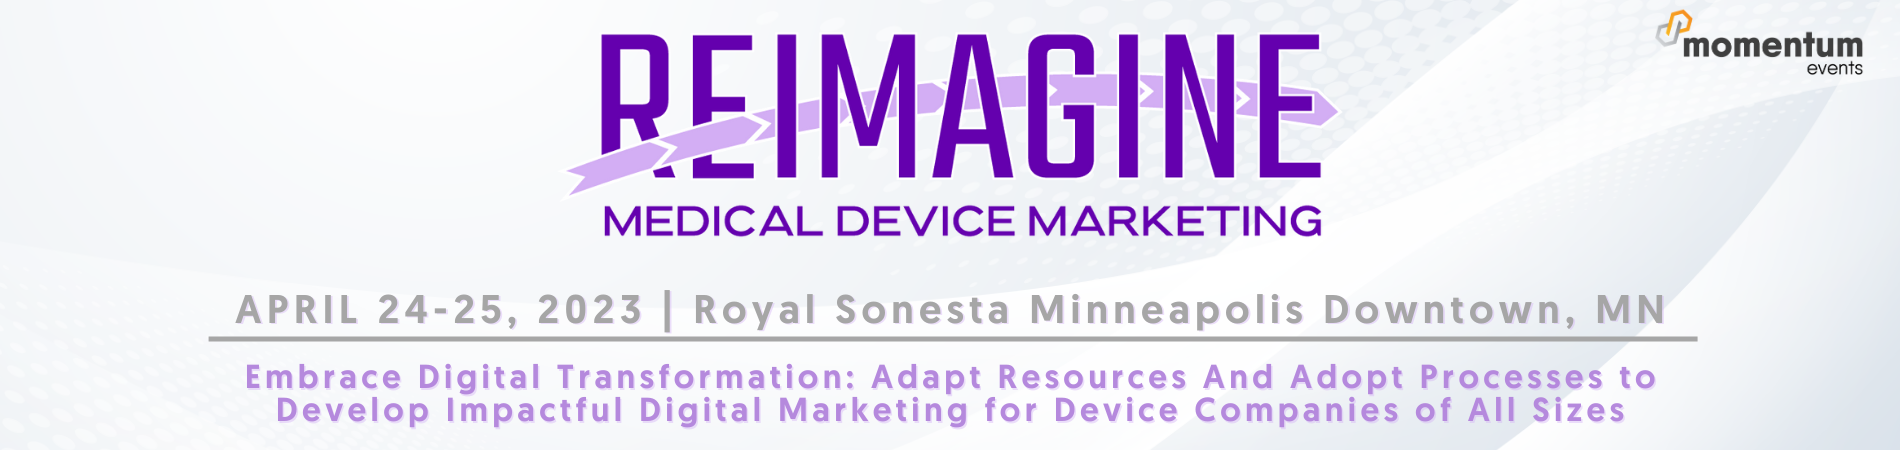 Banner for ReImagine Medical Device Marketing, April 24-25, 2023Royal Sonesta Minneapolis Downtown, MN, Embrace Digital Transformation, Adapt Resources and Adopt Processes to Develop Impactful Digital Marketing for Device Companies of All Sizes